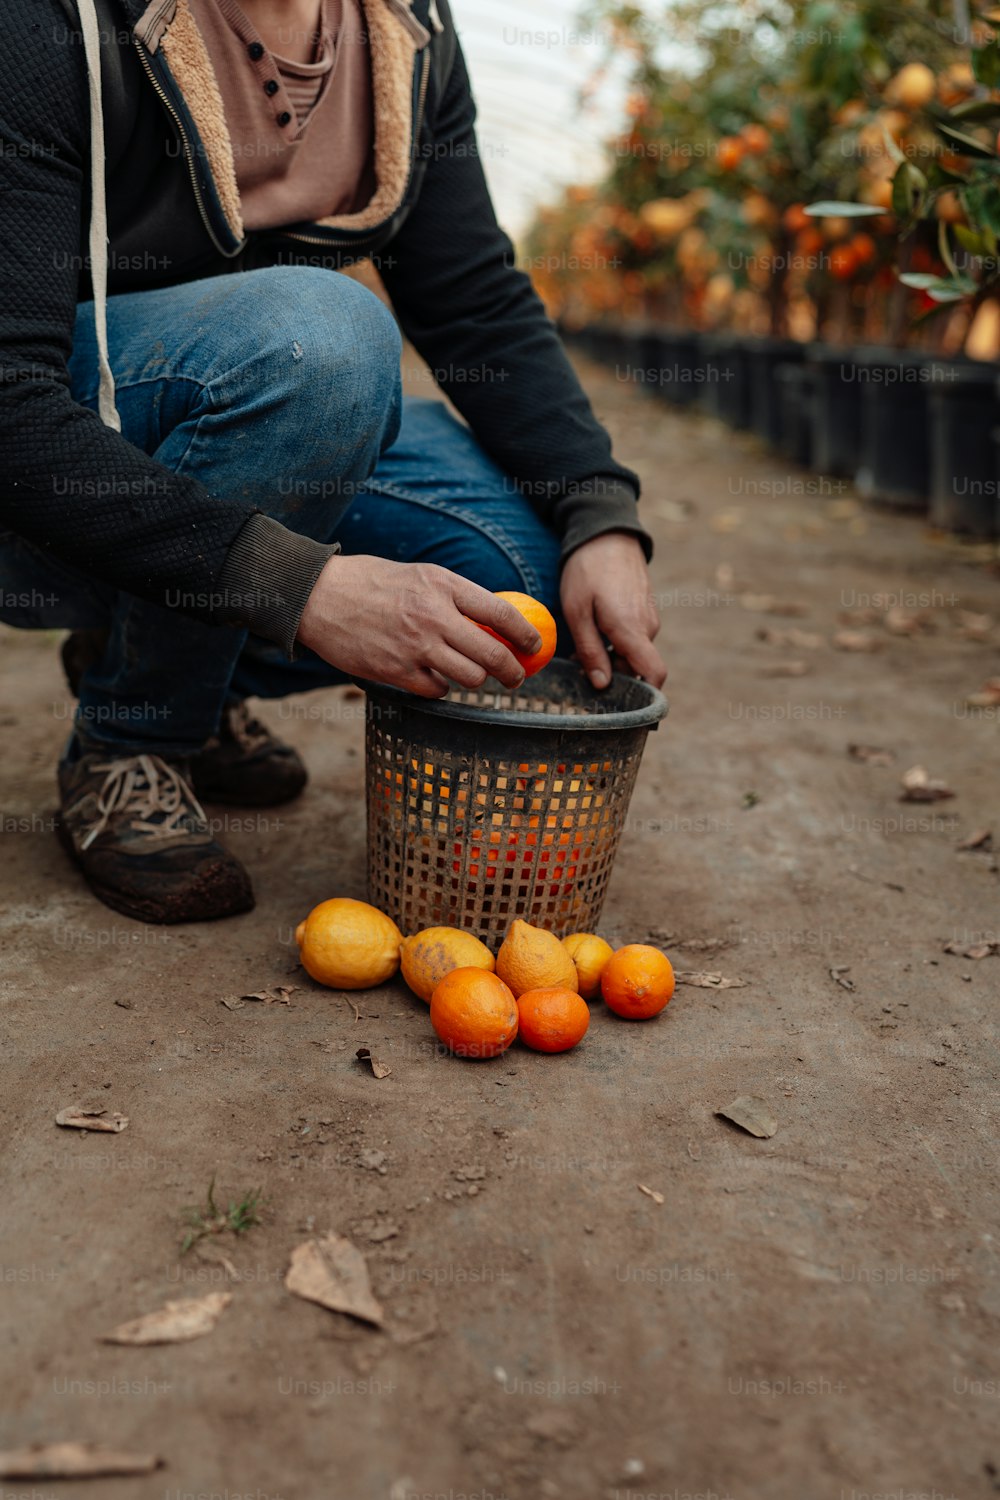 a person kneeling down picking oranges from a basket